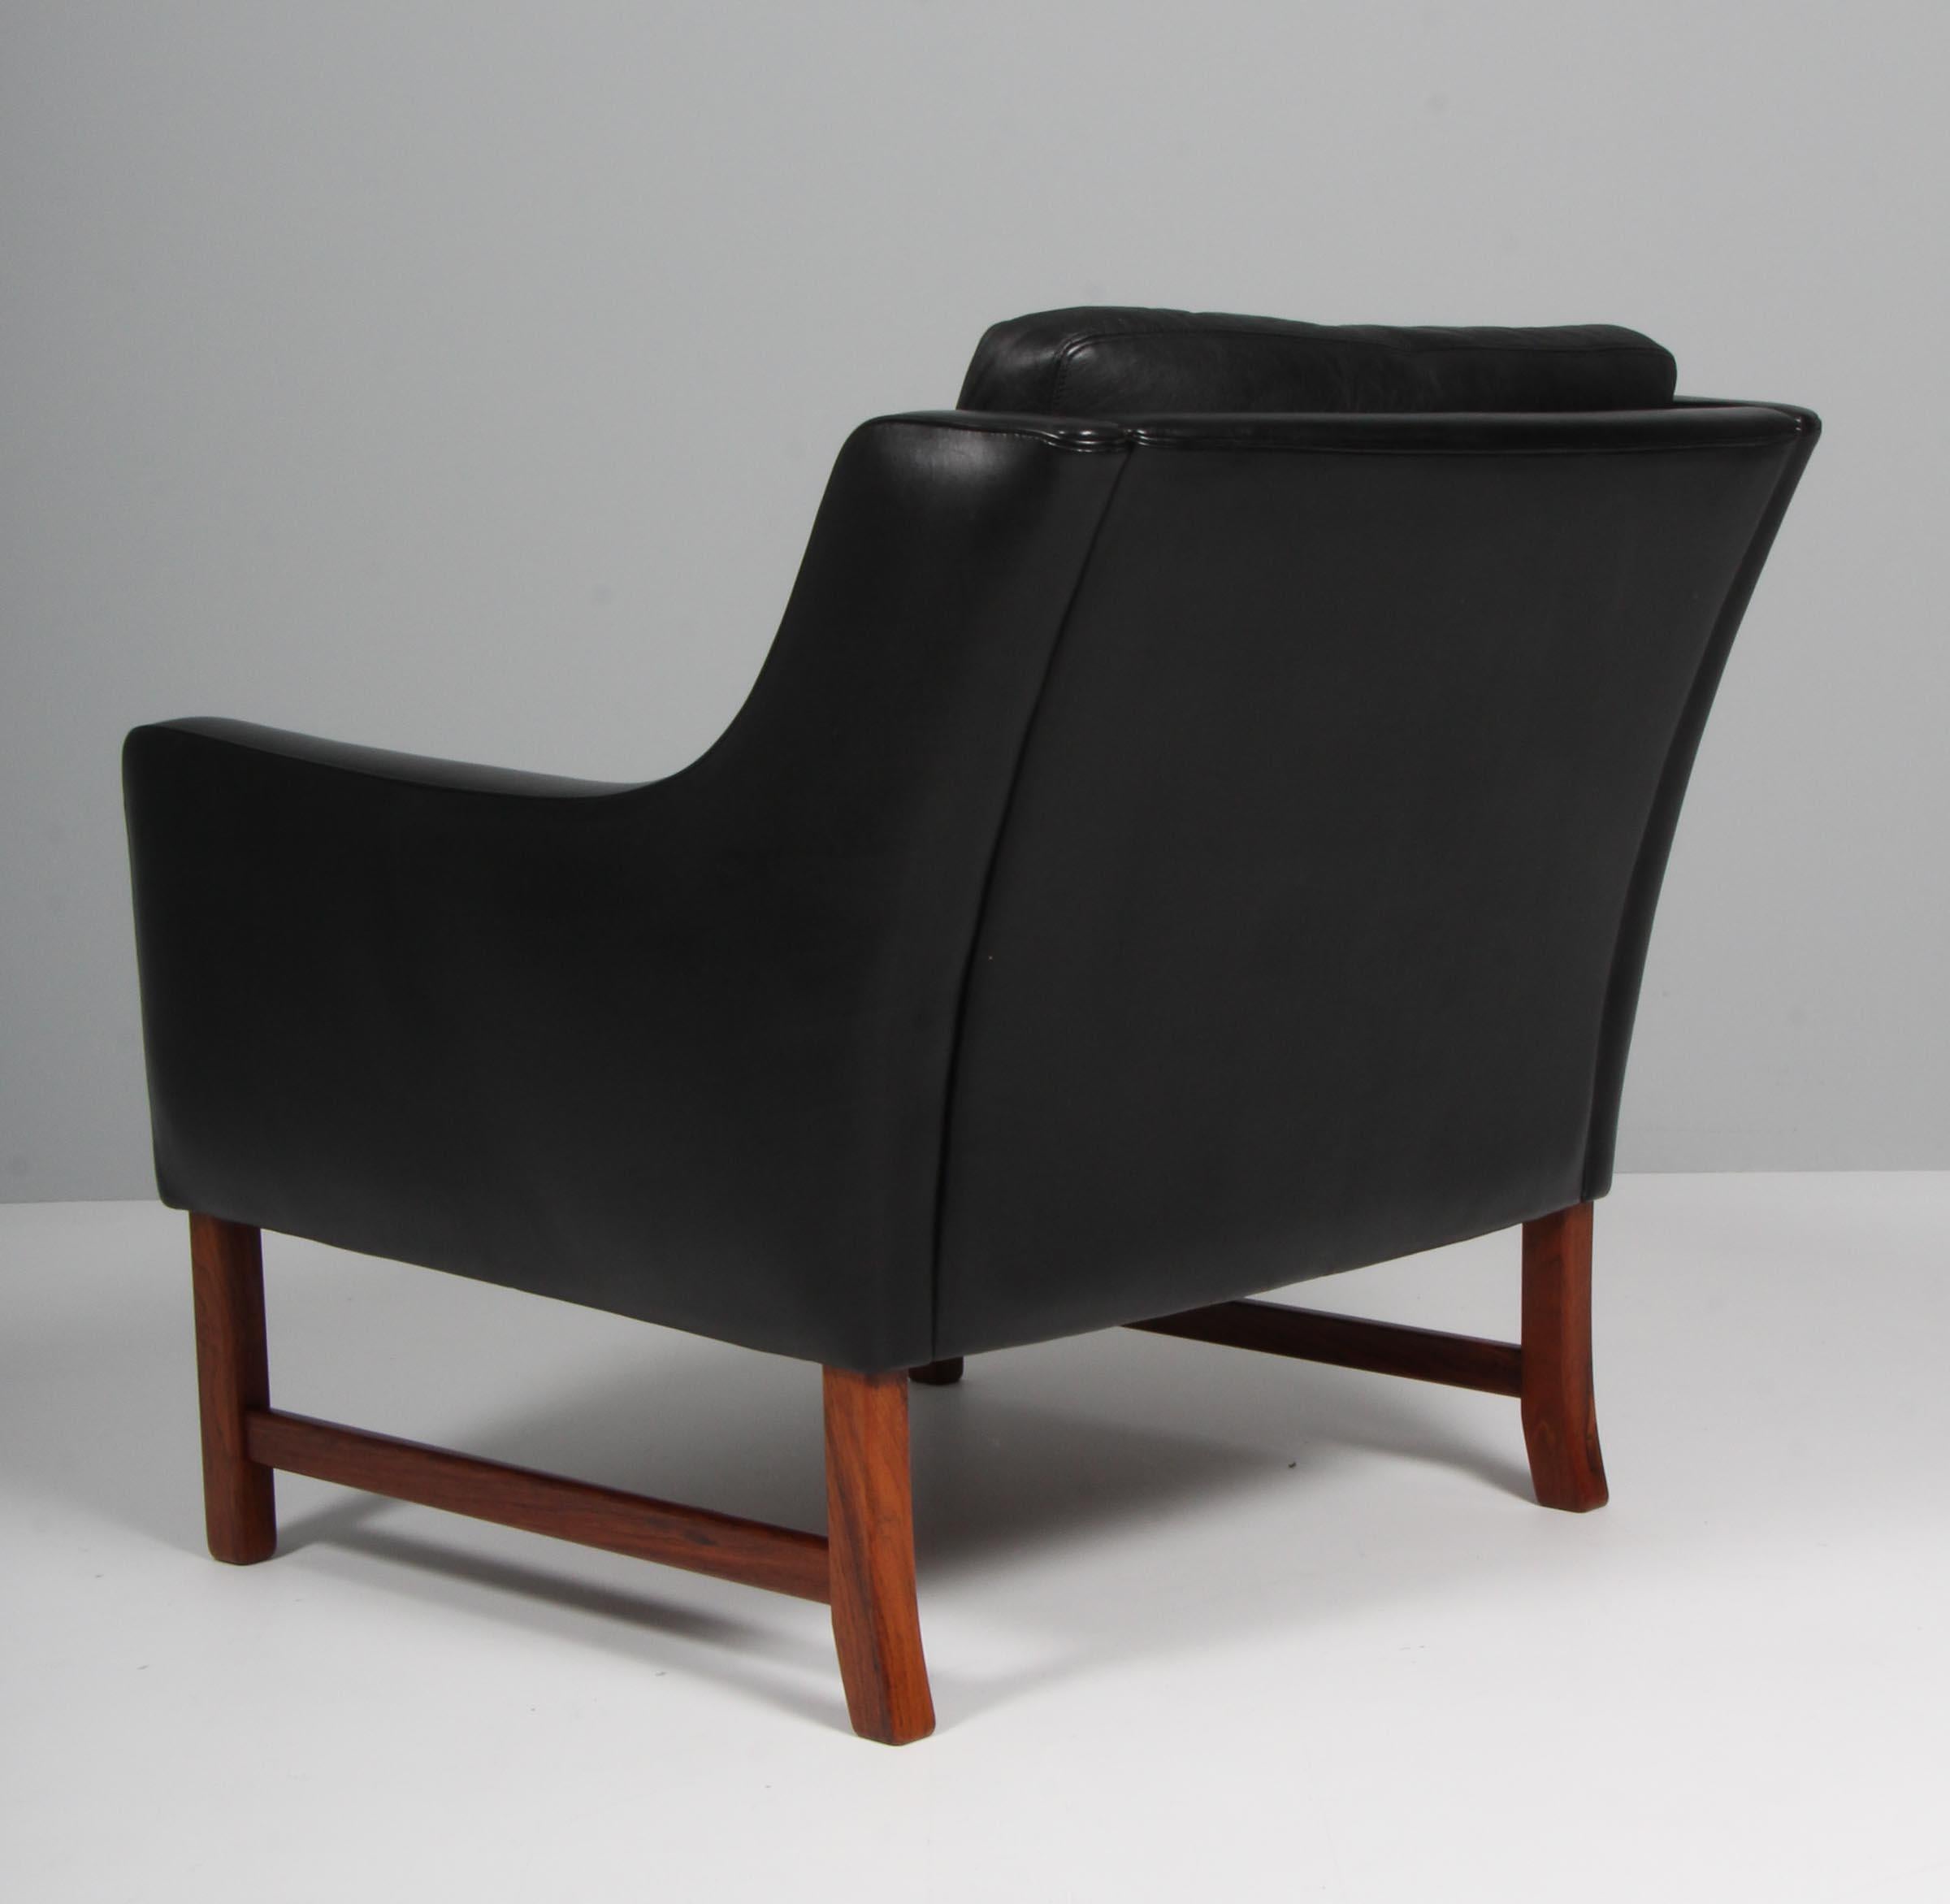 Frederik Kayser Lounge Chair, Rosewood and Leather, Norway 1